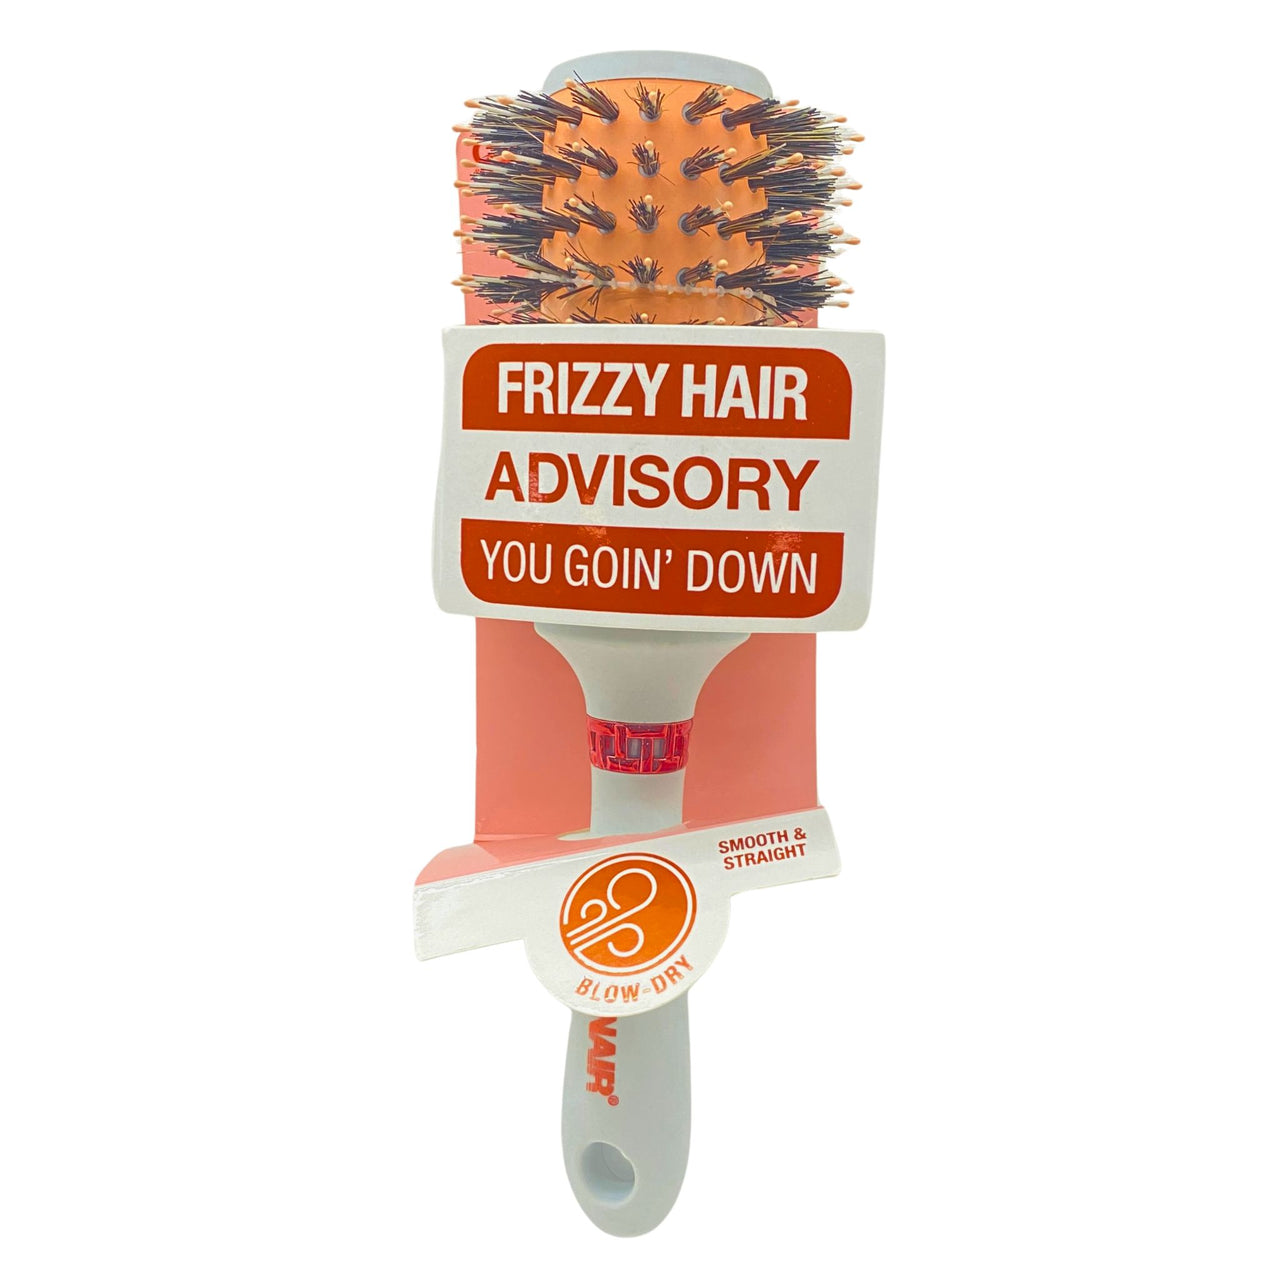 Conair Frizzy Hair Advisory You Goin Smooth & Straight Blow-Dry